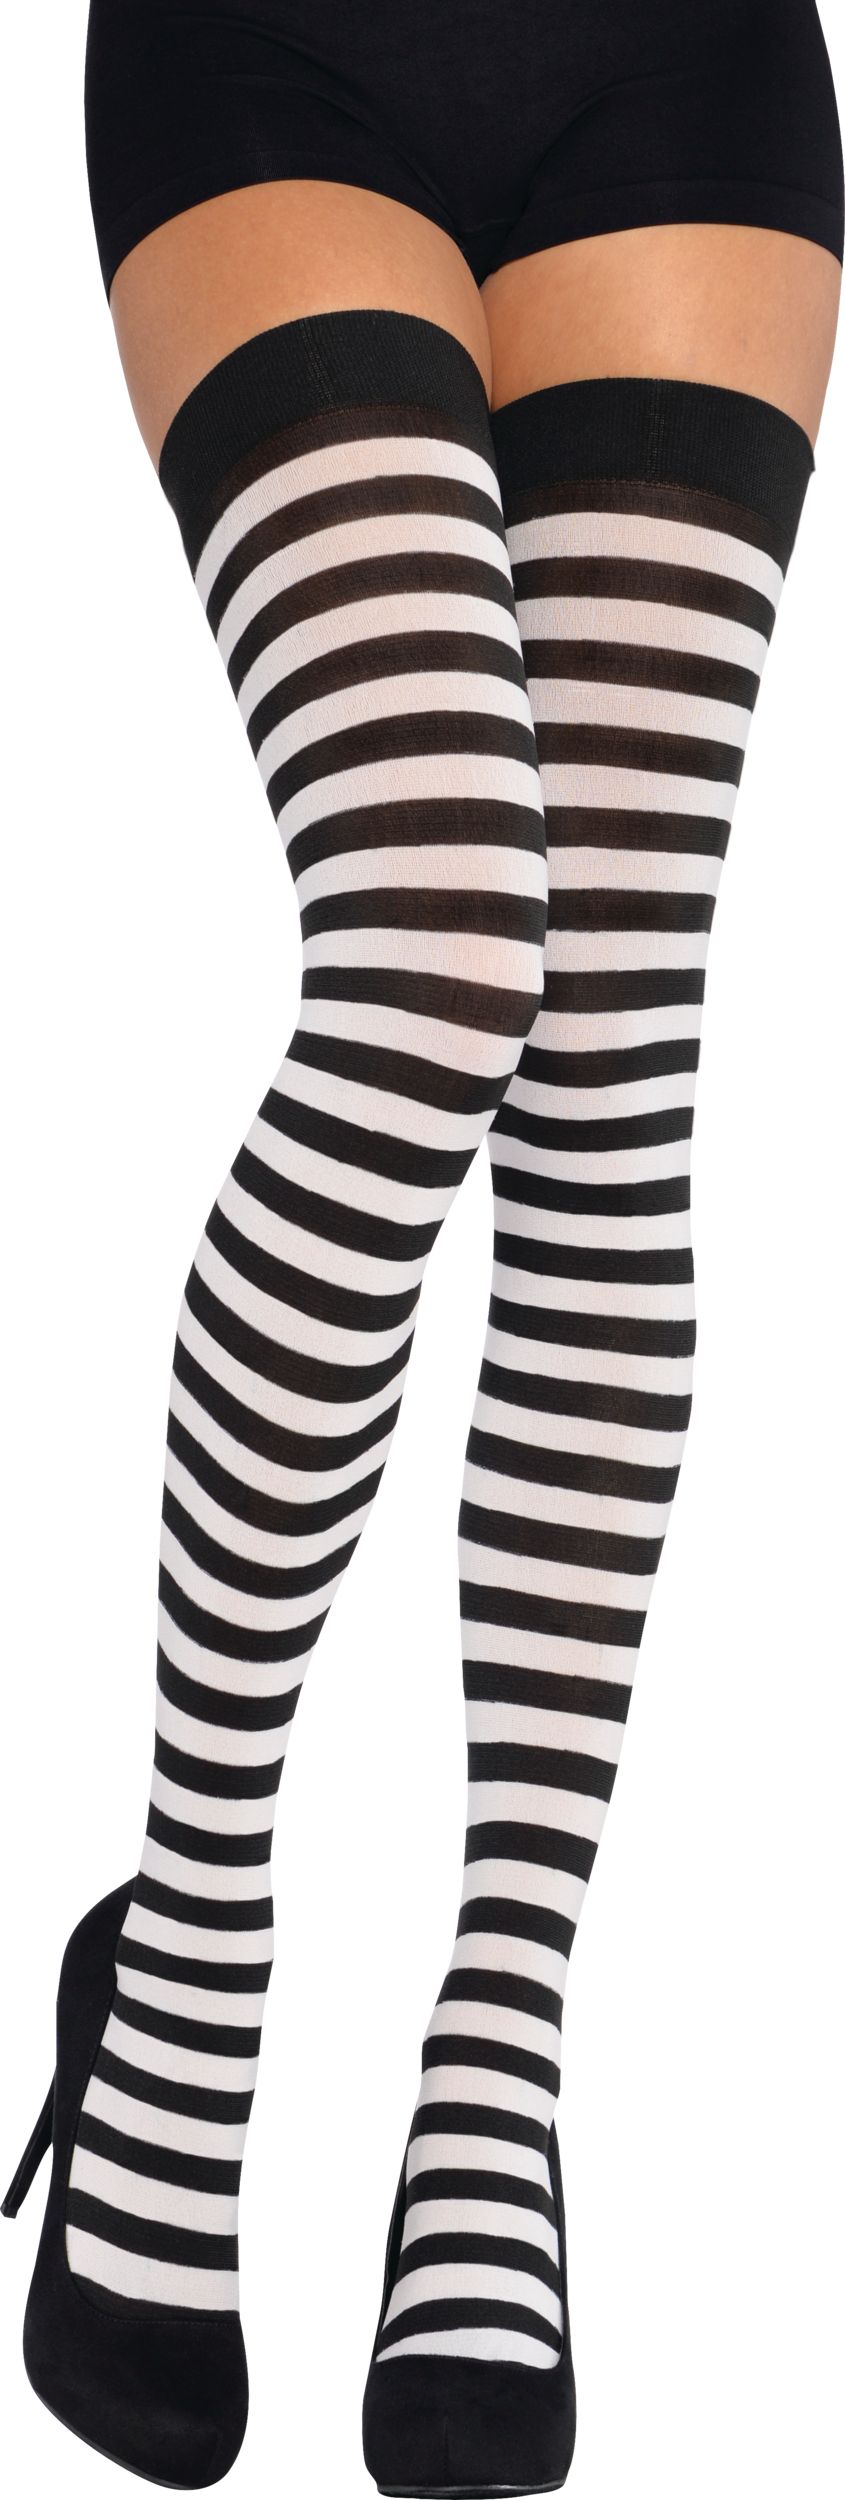 Adult Thigh-High Stocking Tights, Black/White Striped, One Size, Wearable  Costume Accessory for Halloween